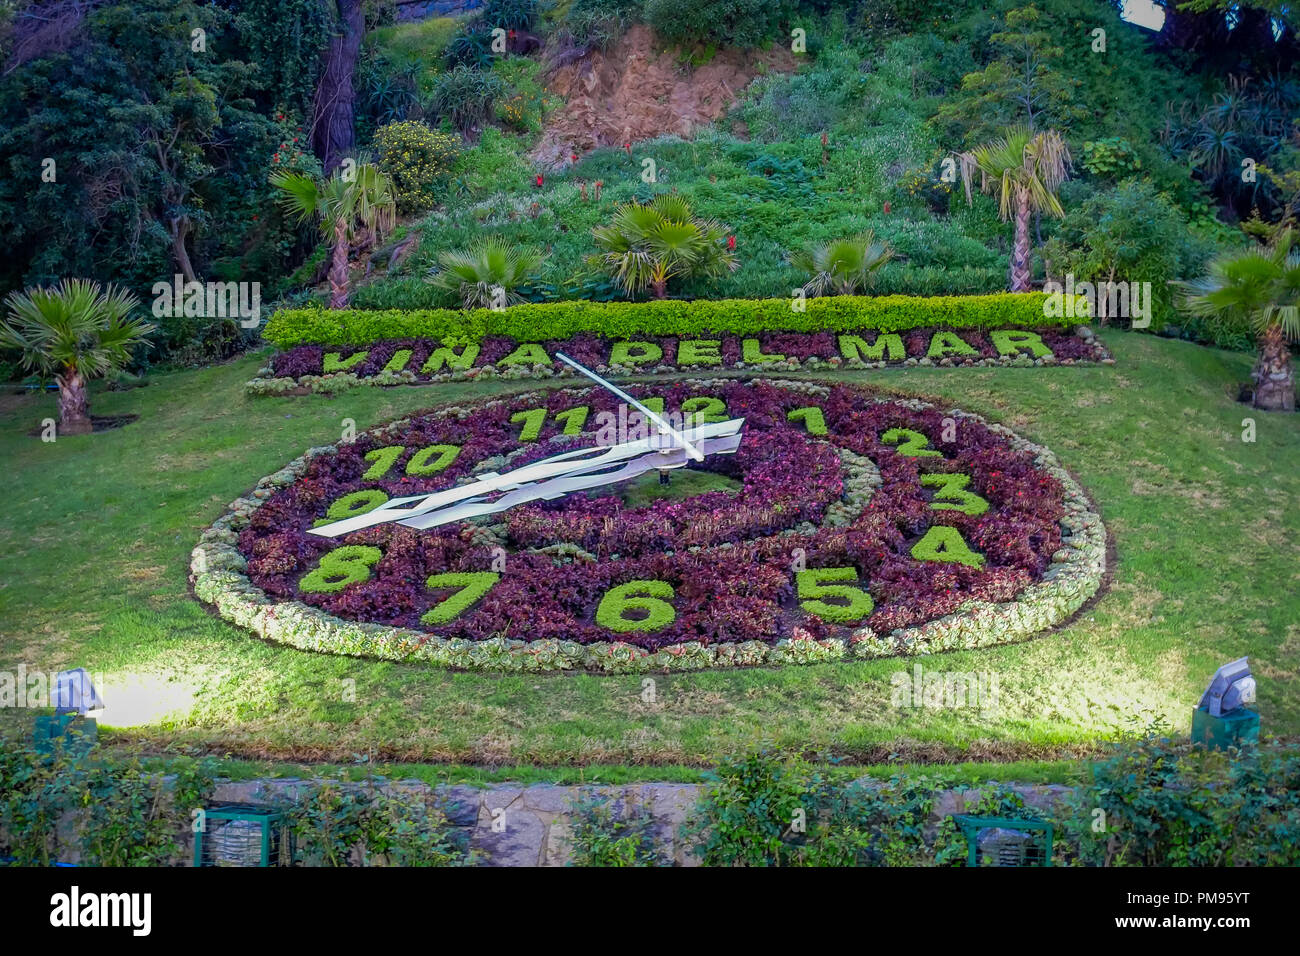 VINA DEL MAR, CHILE - SEPTEMBER, 15, 2018: Outdoor view of flower clock in Vina del Mar, is one of the most populat touristic destinations in Chile Stock Photo